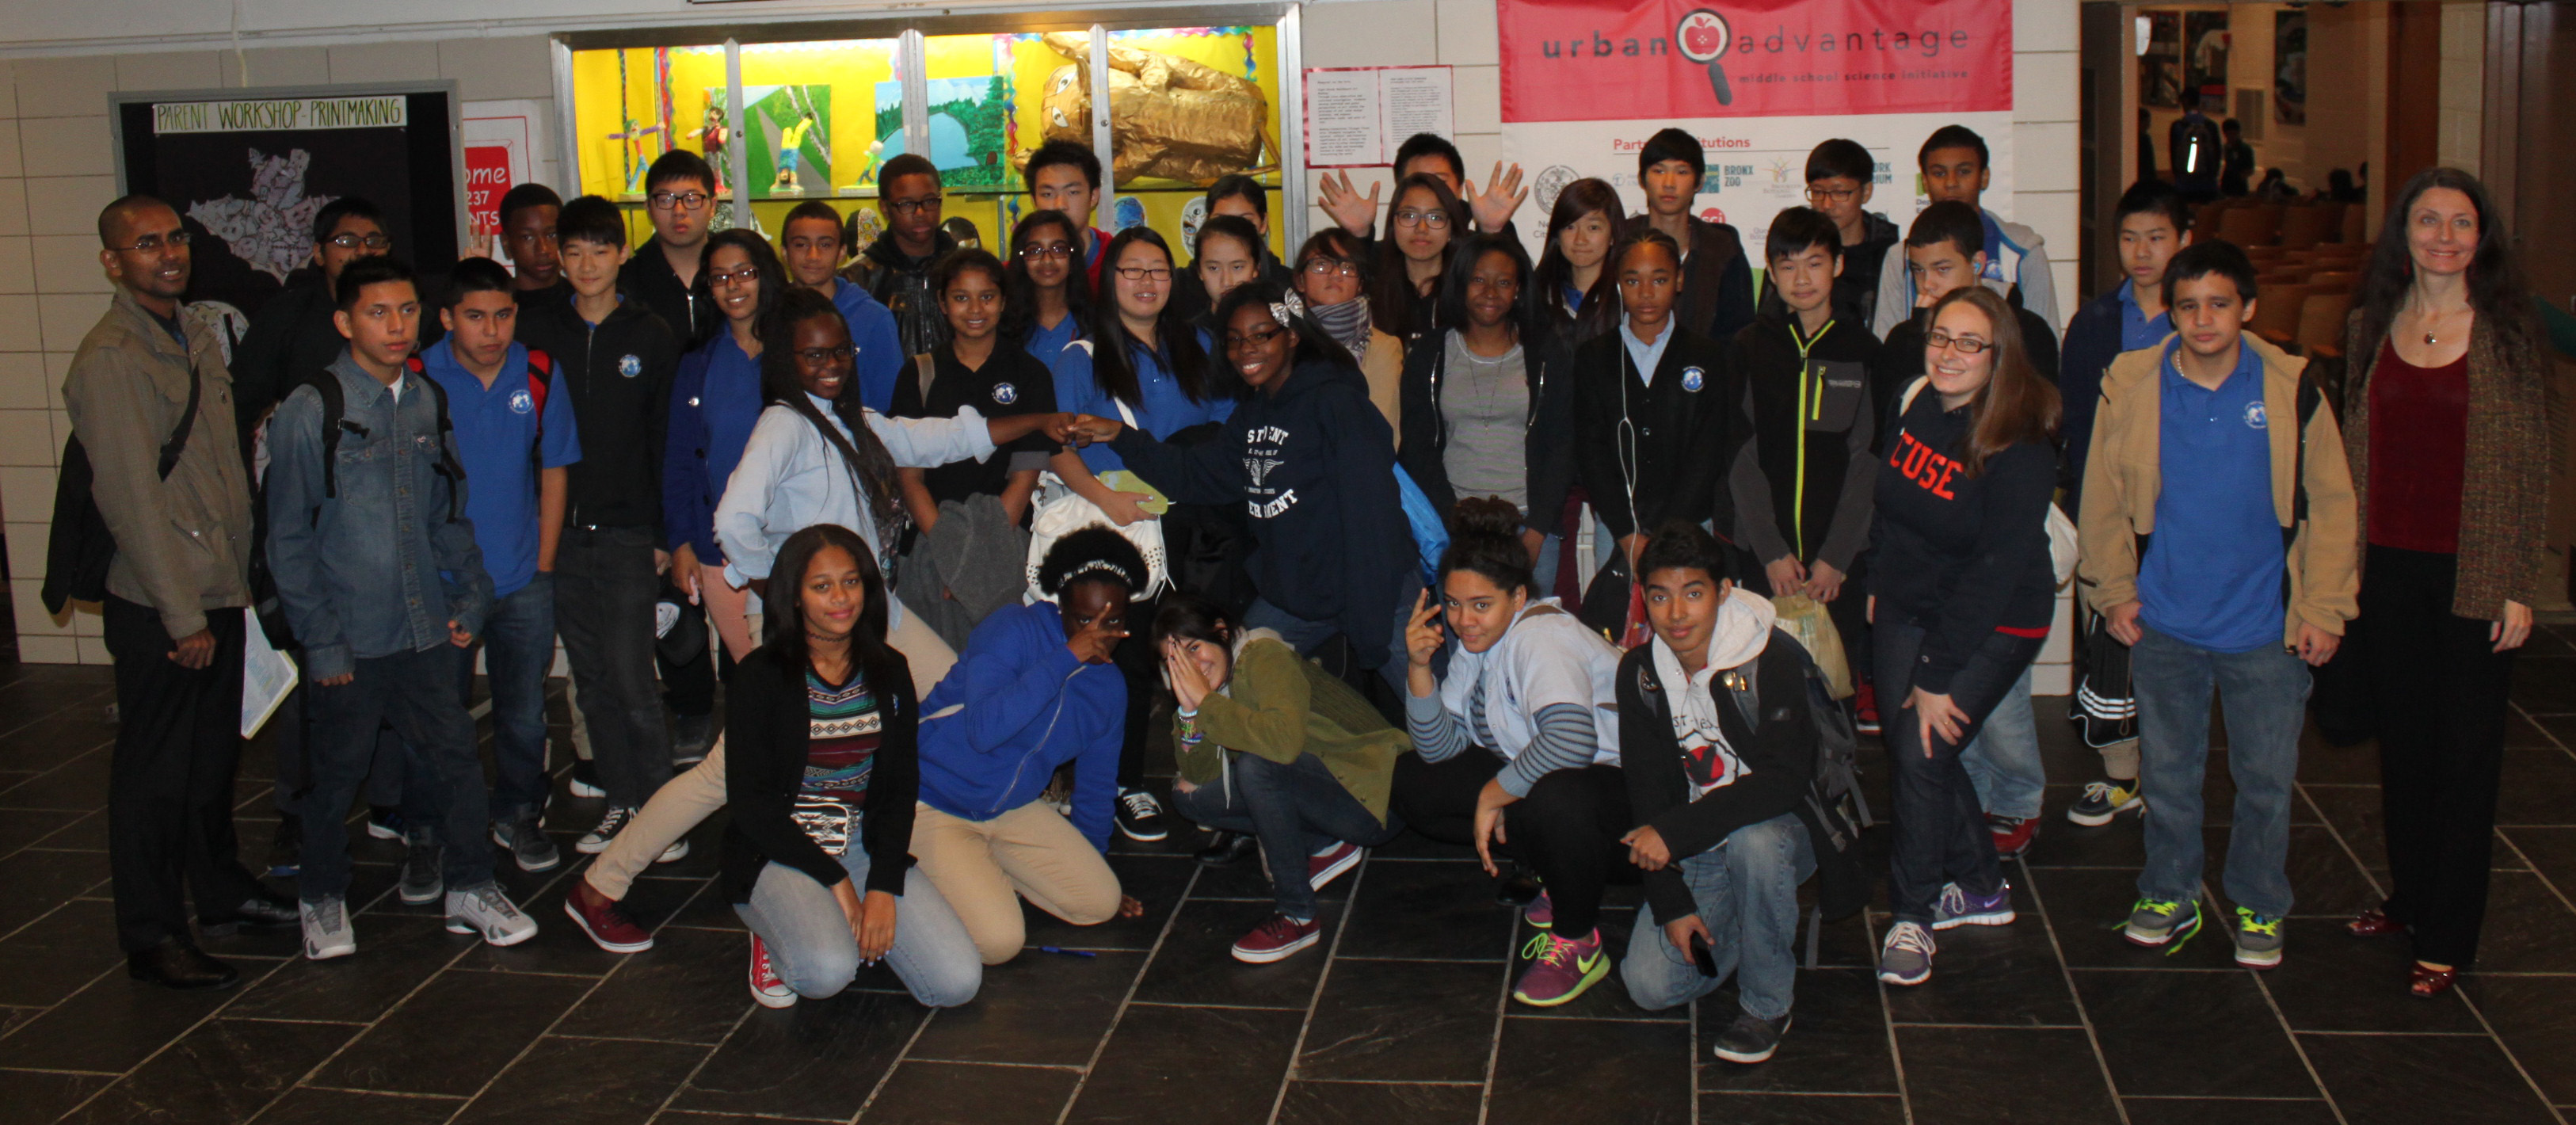 They had the opportunity to explore LIU Brooklyn...